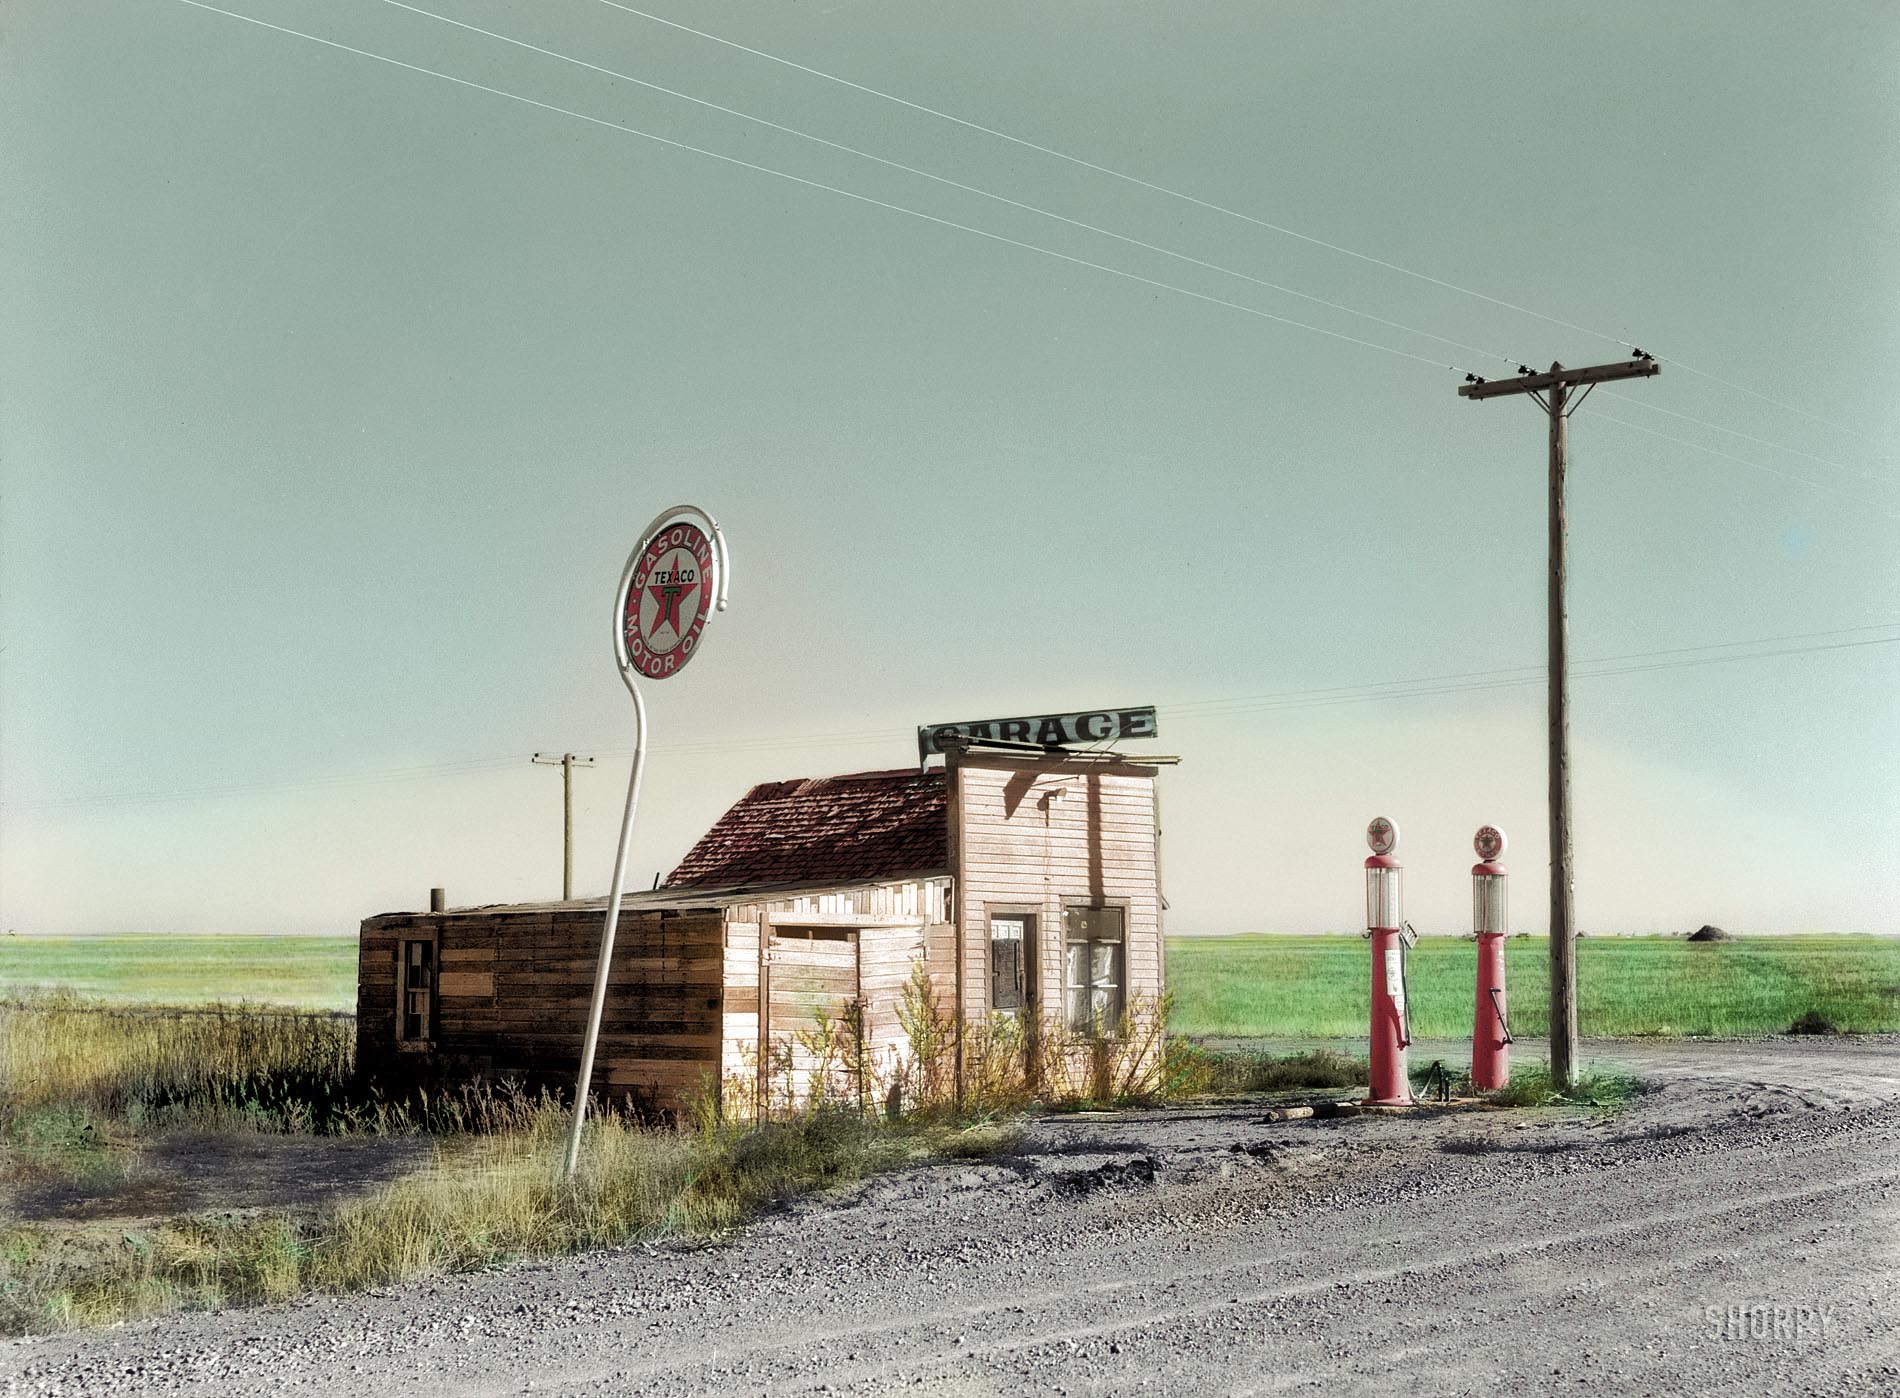 Colorized version of this Shorpy photo.